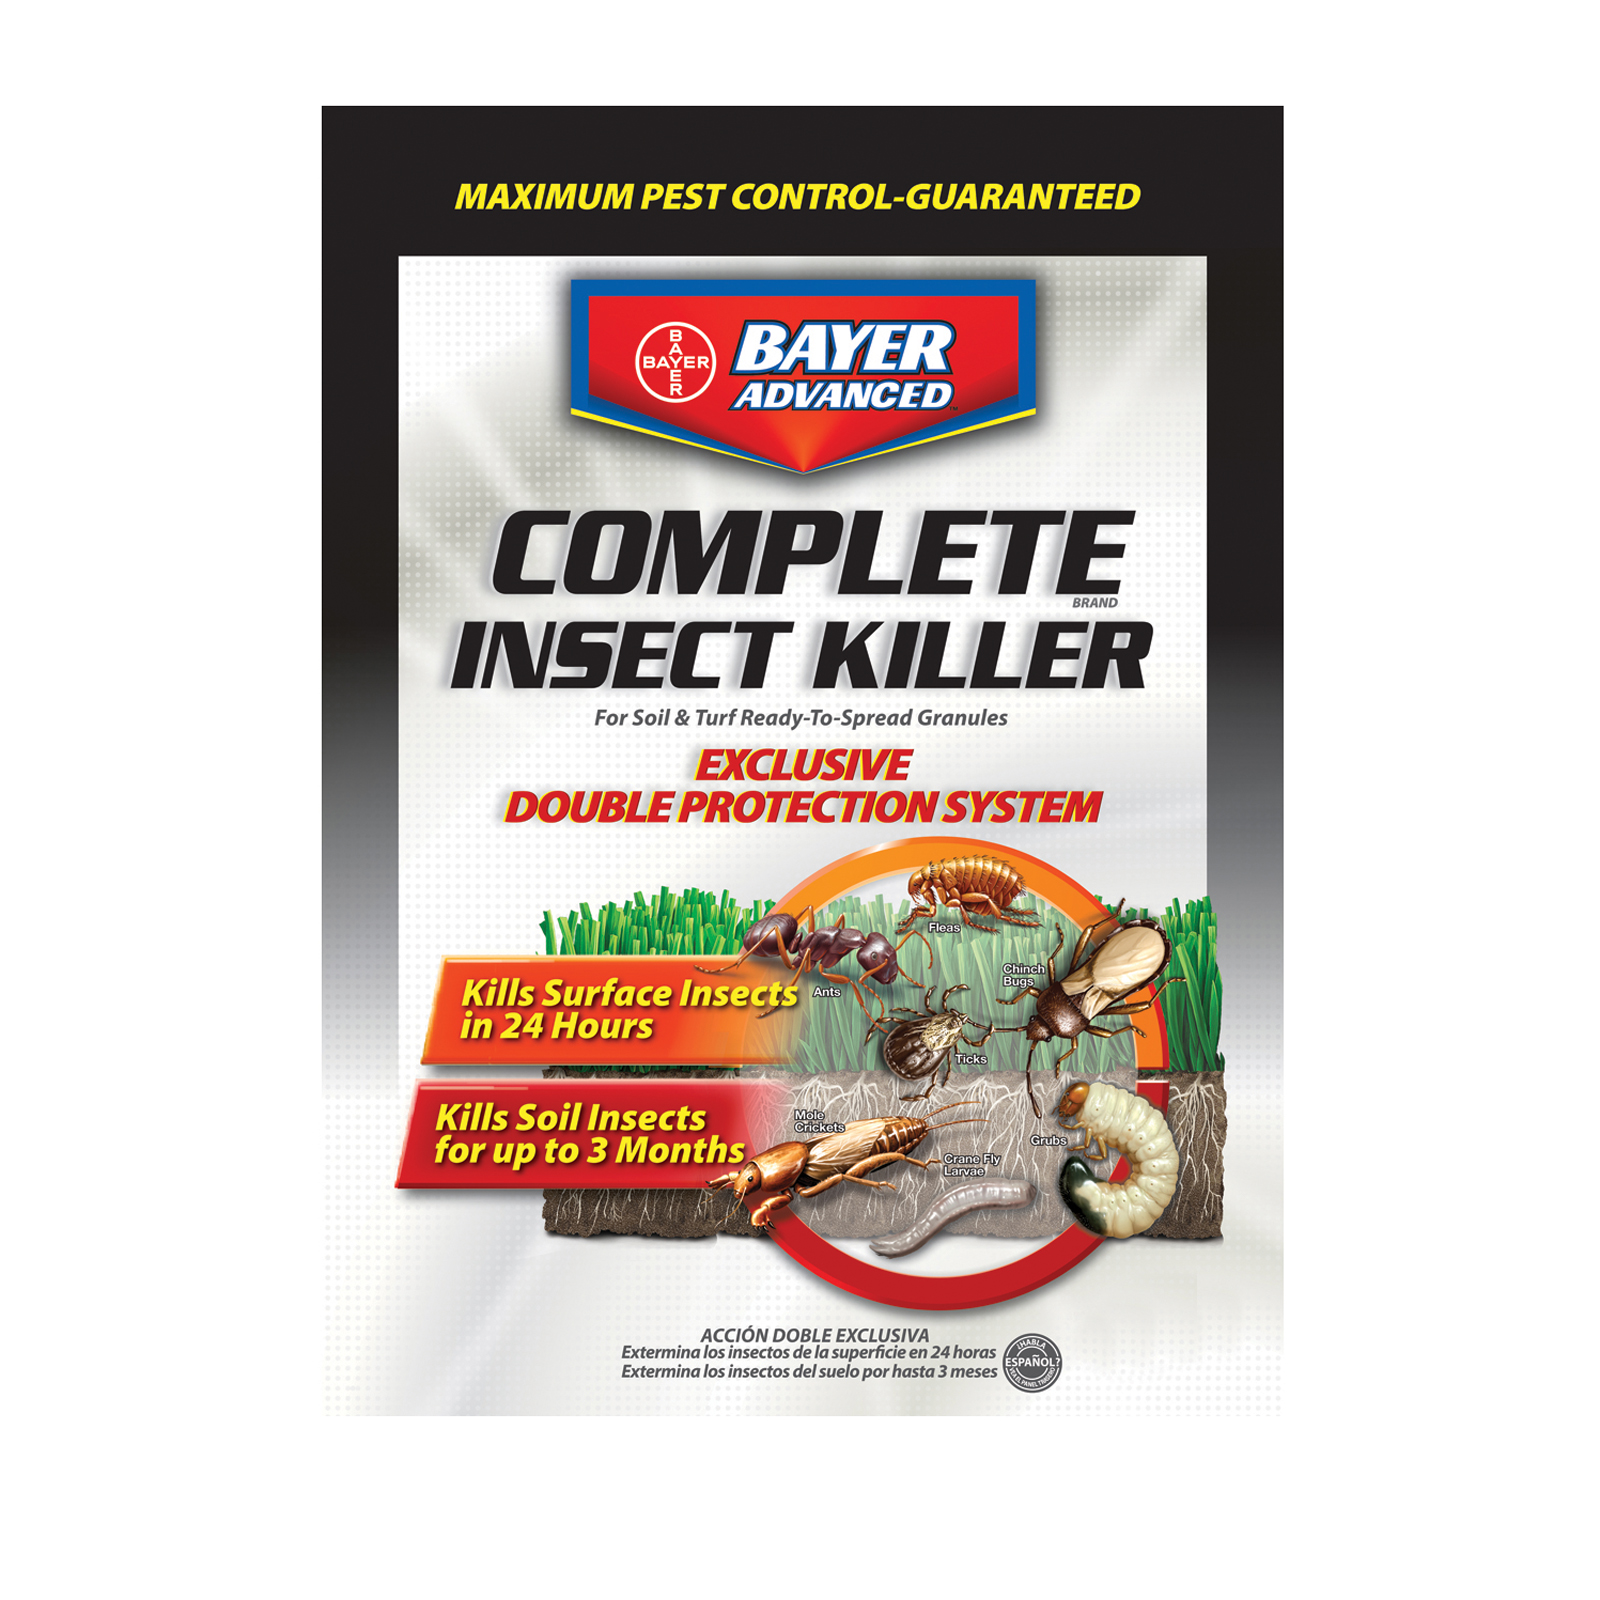 Bayer BAY700289T 20 lb. Complete Lawn Insect Killer